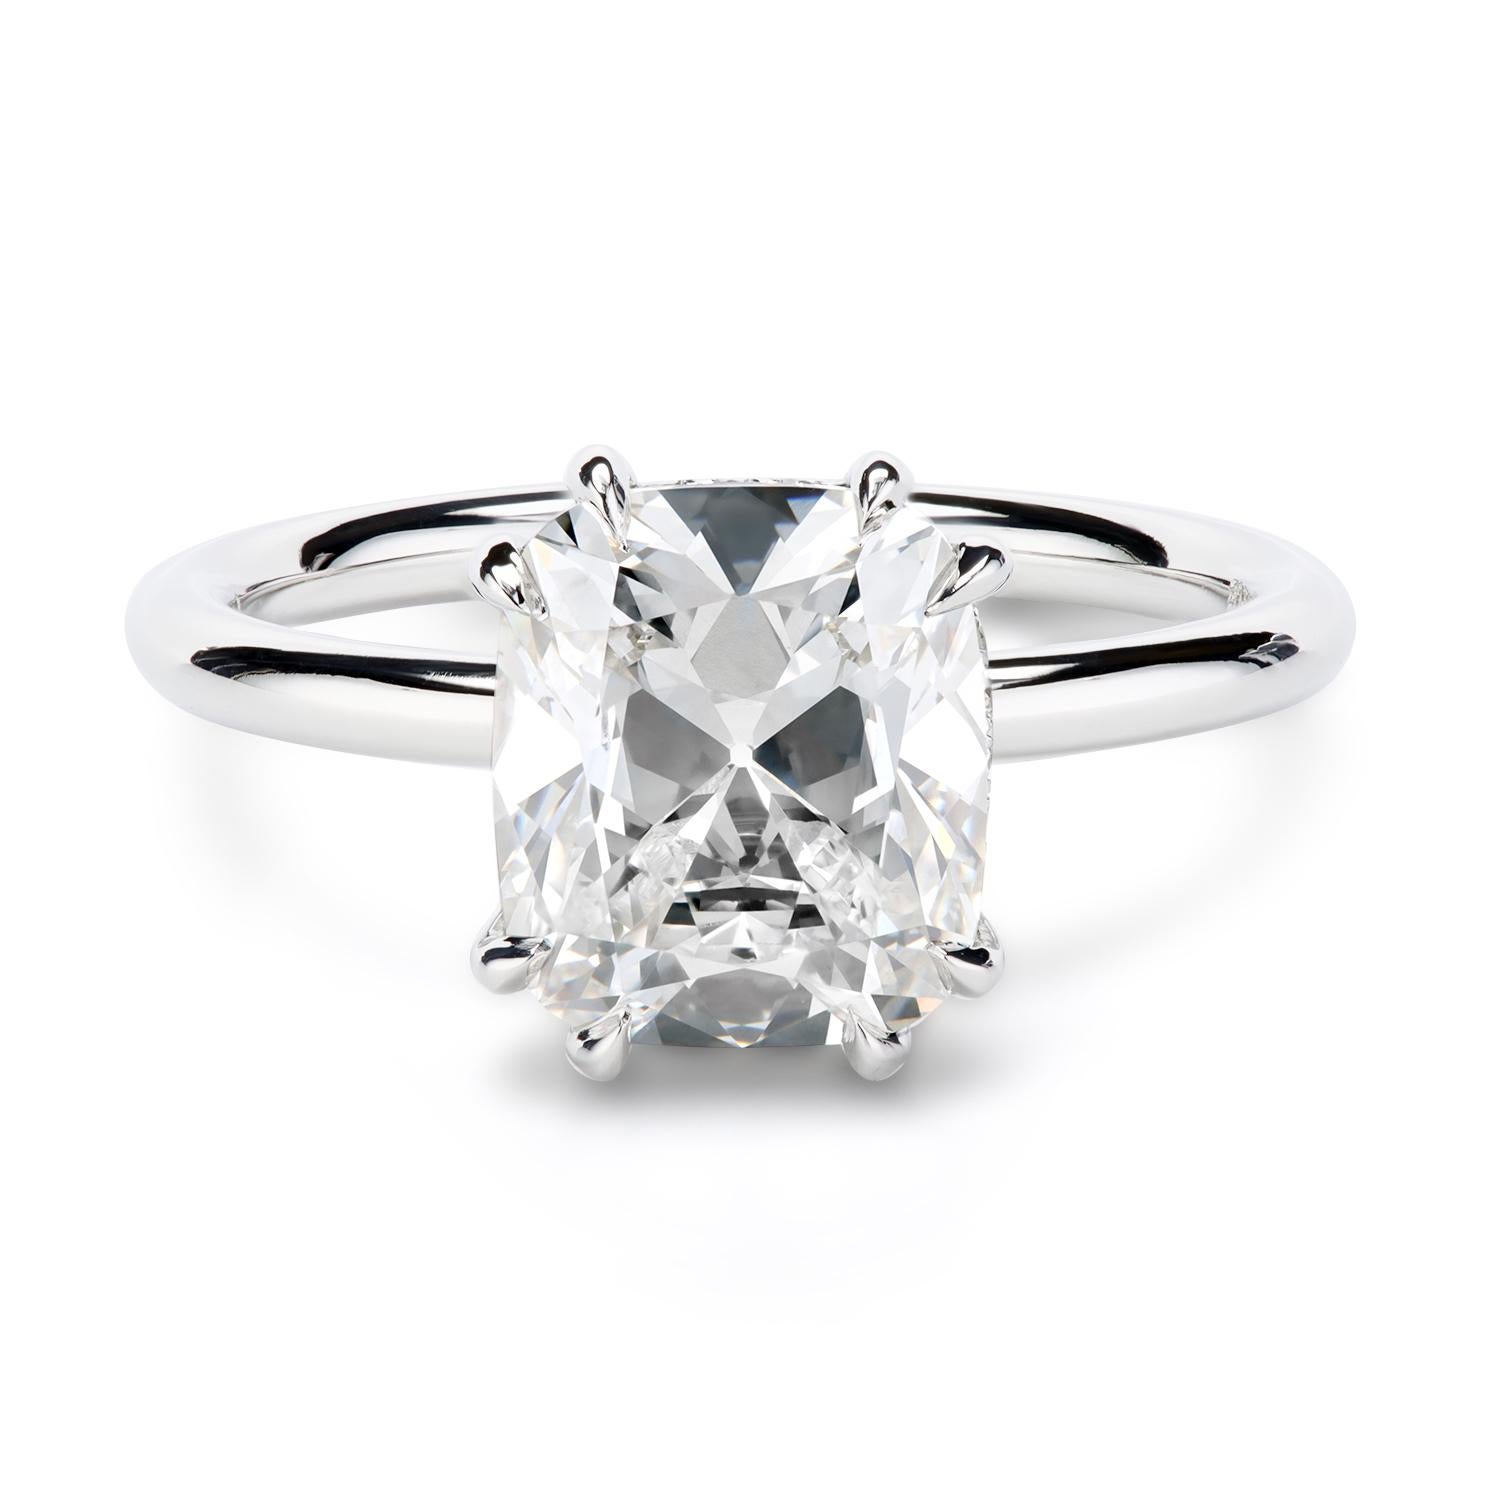 The Leon Mege hand-forged 410™ solitaire features a cushion diamond sitting on a diamond-studded upper gallery (